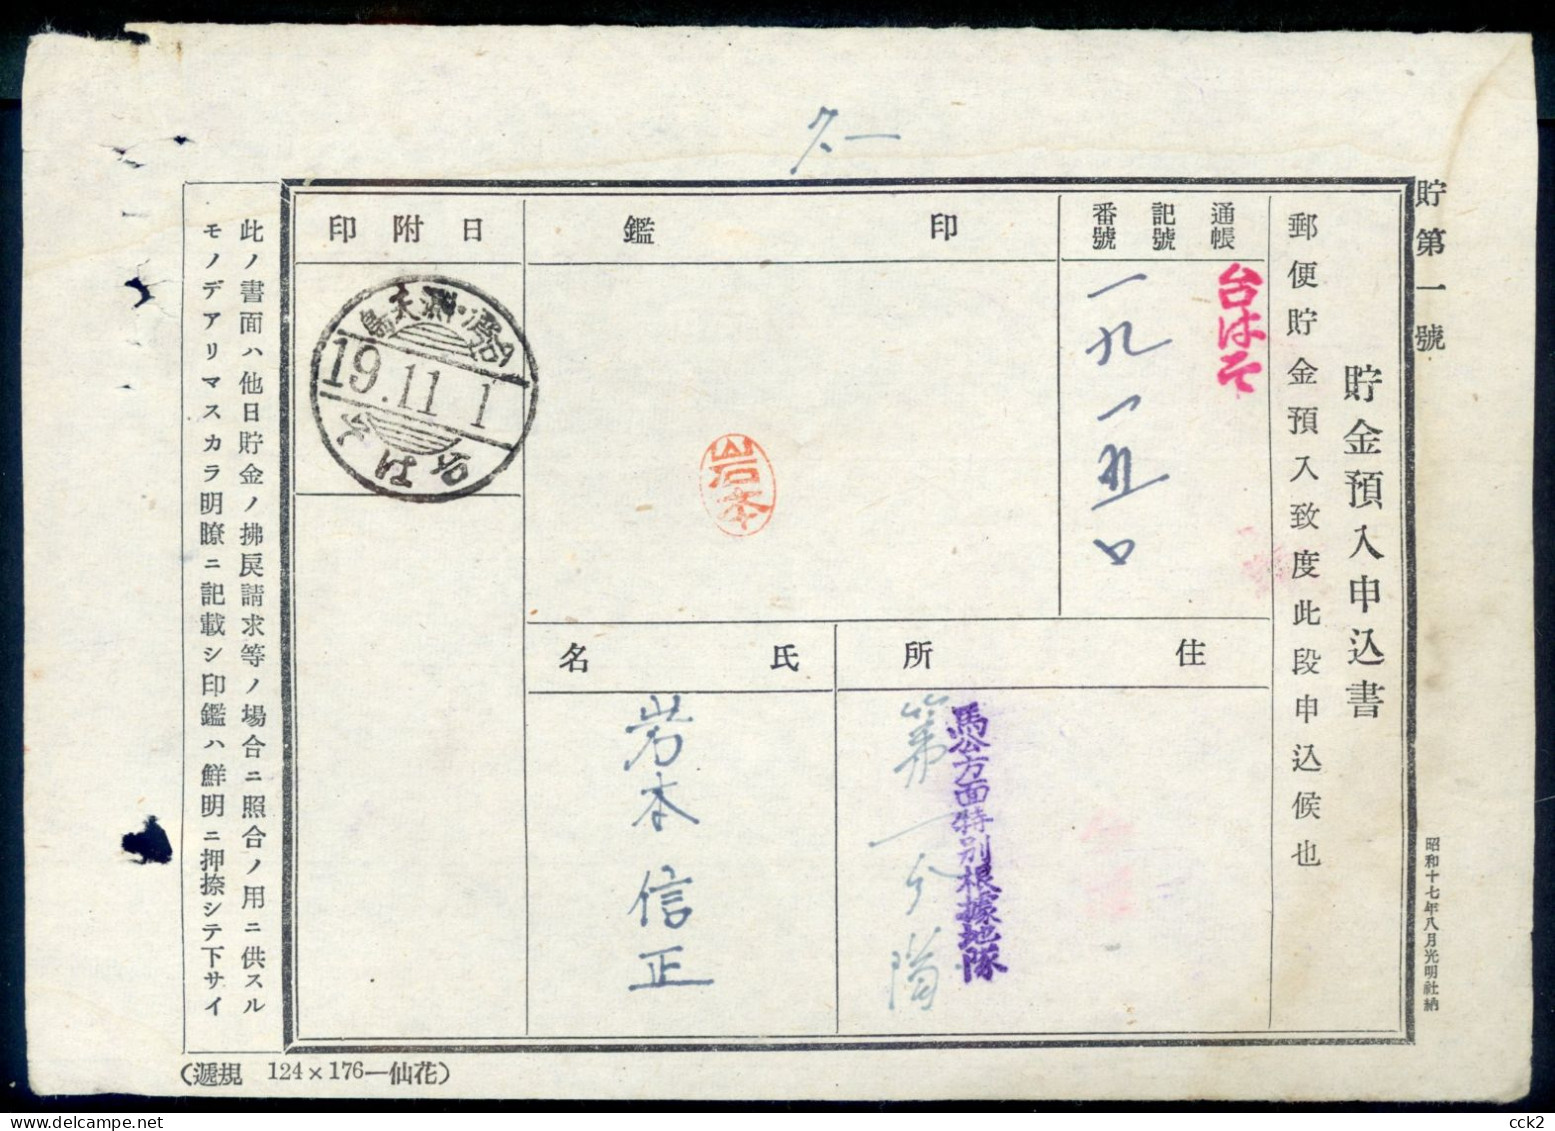 JAPAN OCCUPATION TAIWAN- Reserve Fund Early Entry Application Form(Taiwan Cetian Island) 19.11.1 - 1945 Japanse Bezetting